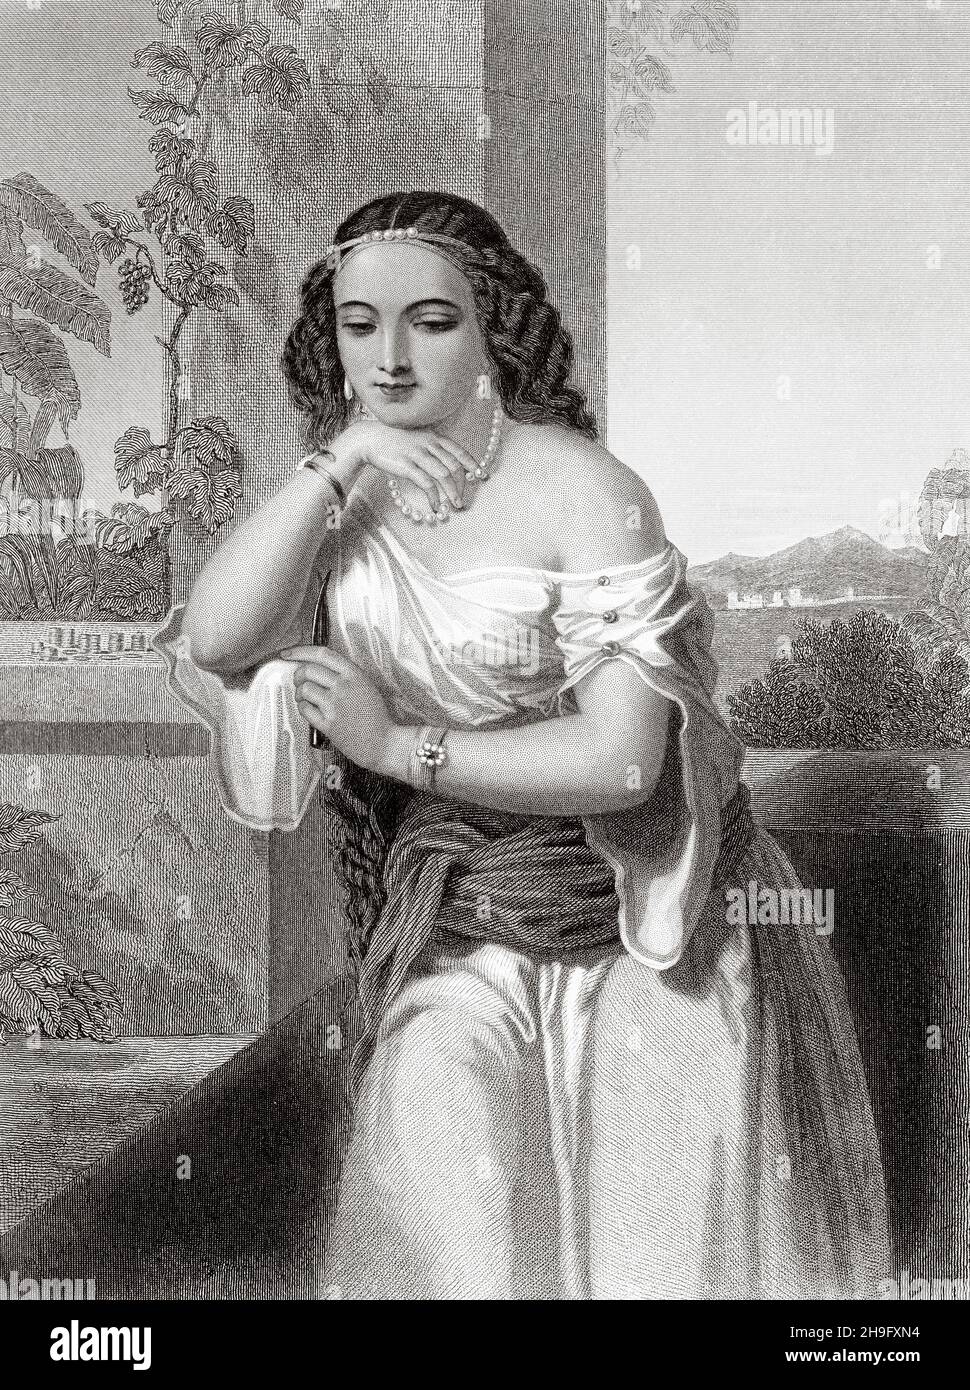 Delilah, Philistine of the Valley of Sorec, Samson's mistress, judge of Israel. She bribed by the Philistines, she sold Samson, cut off her hair while she slept and they were able to capture him. Old 19th century engraved illustration from Mugeres de la Biblia by Joaquin Roca y Cornet 1862 Stock Photo